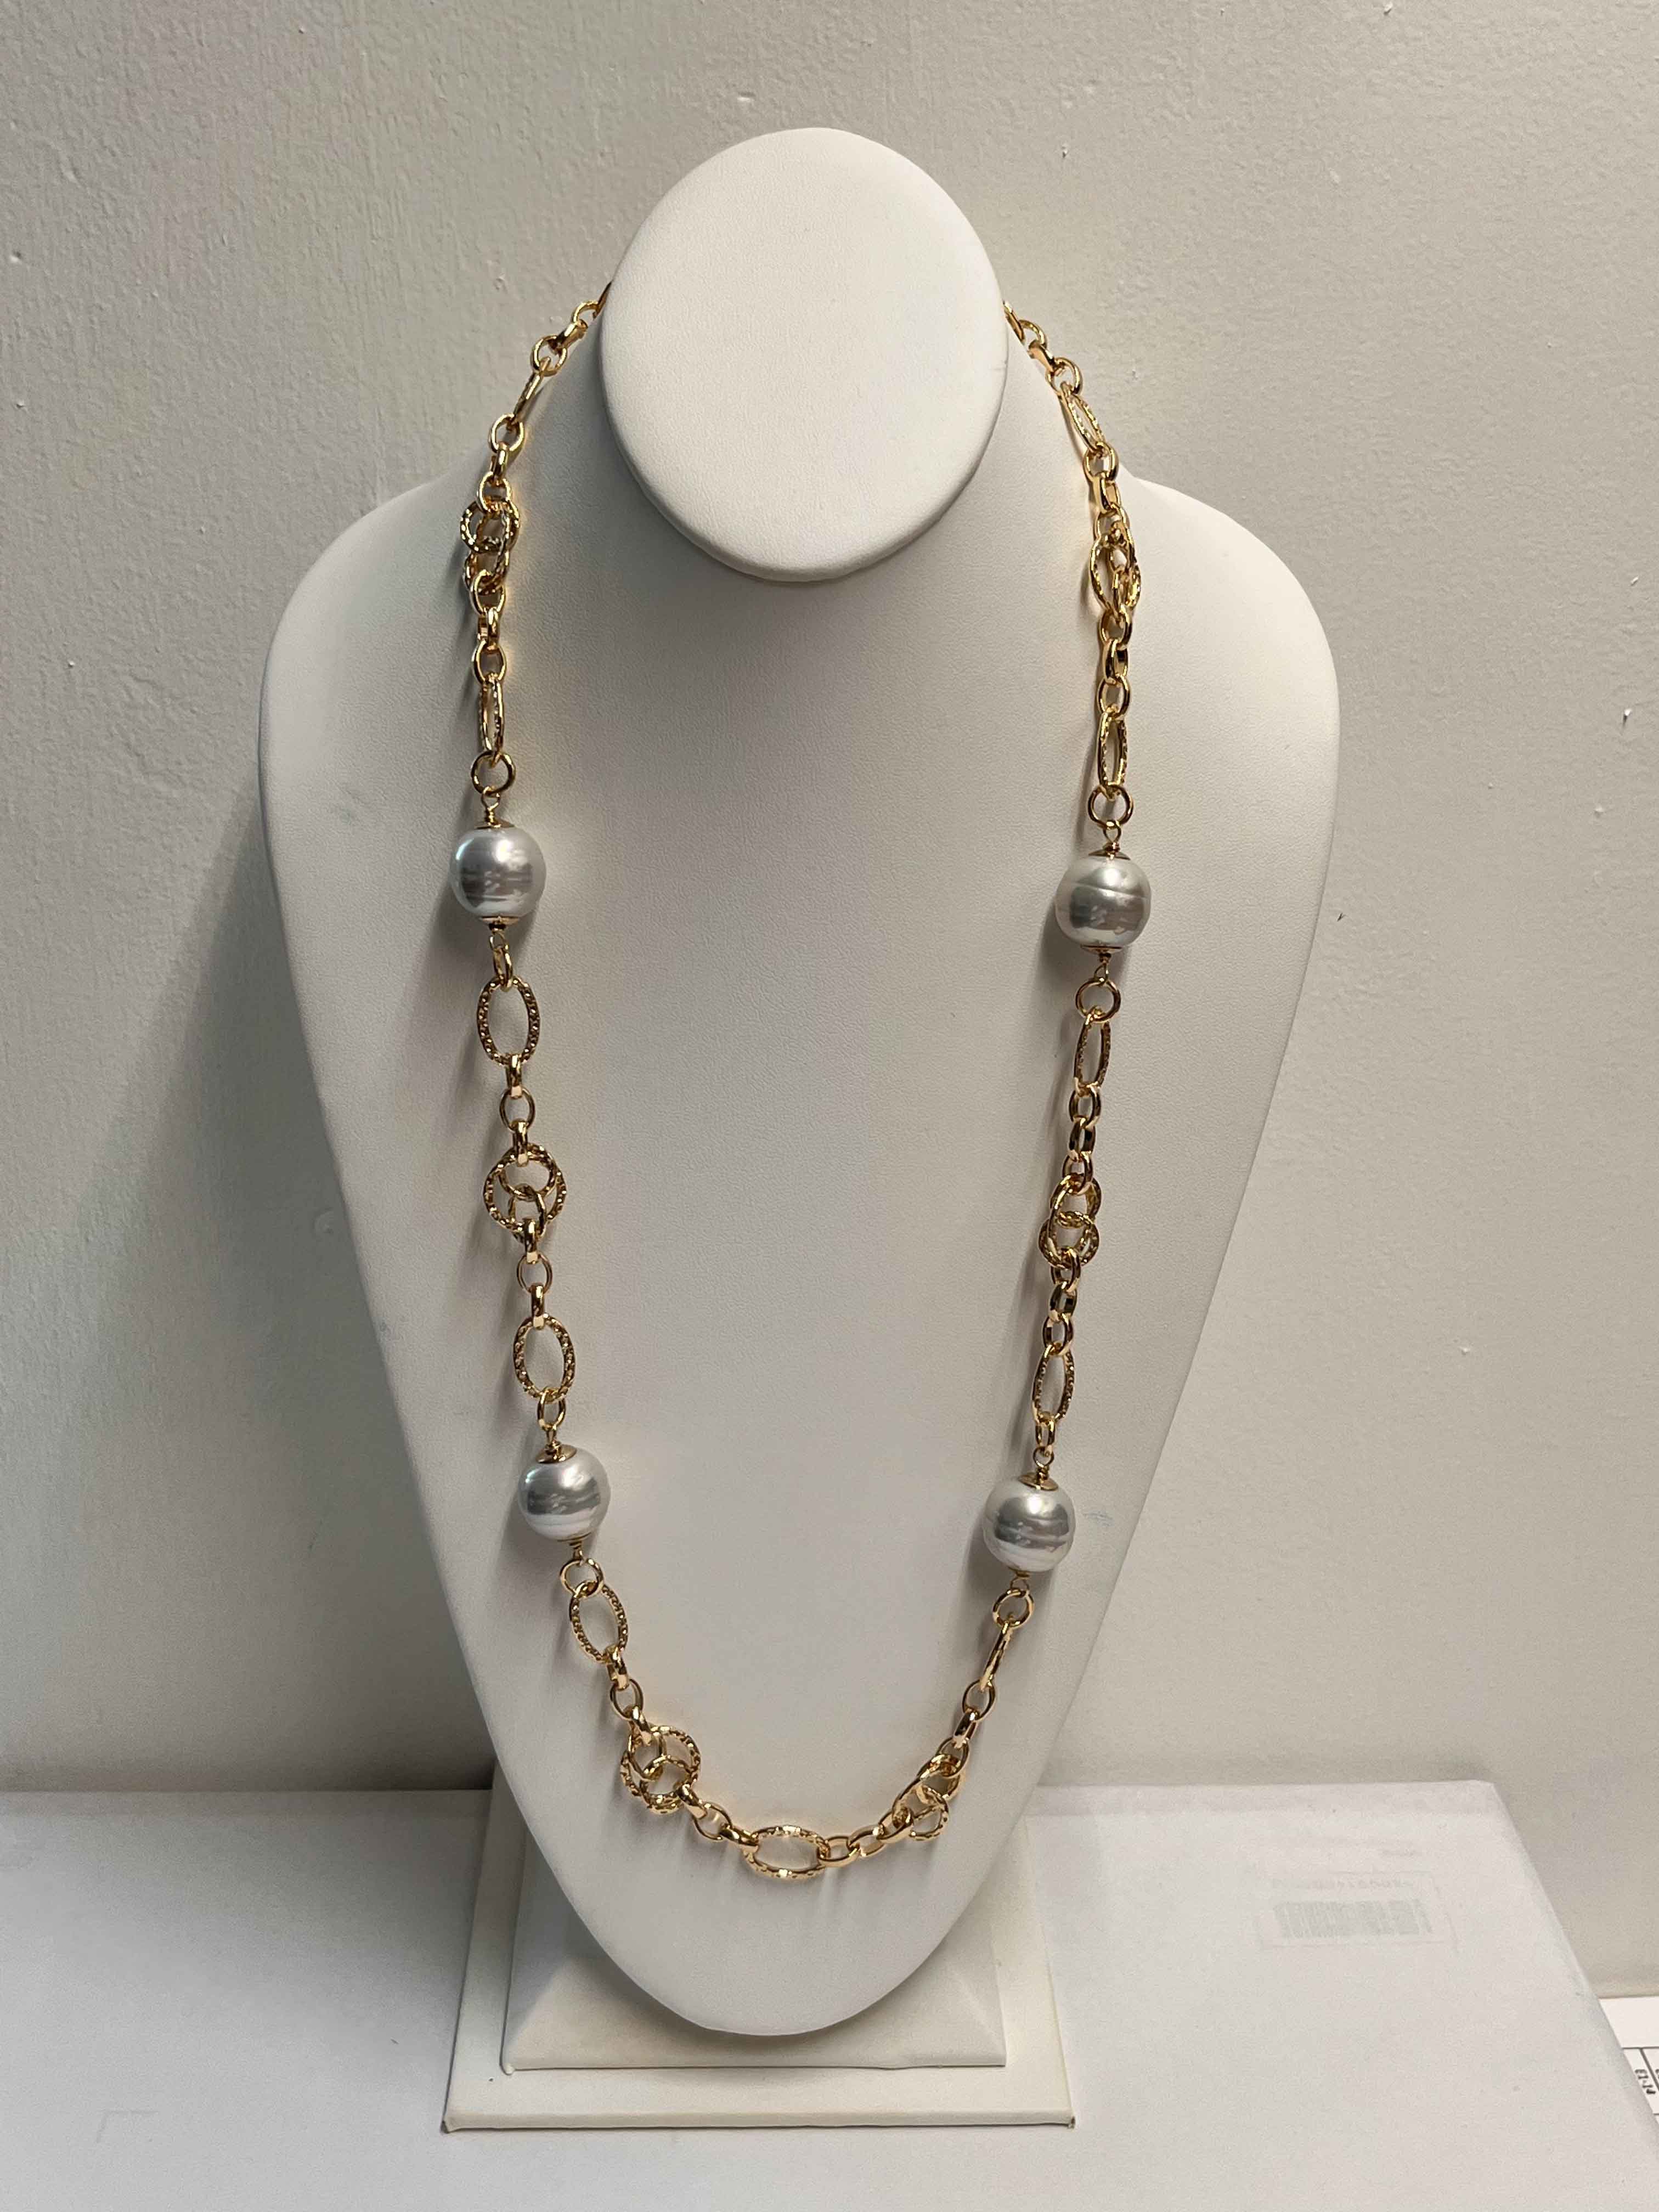 Necklace mallorca pearls gold plated white pearls - Item # 18803